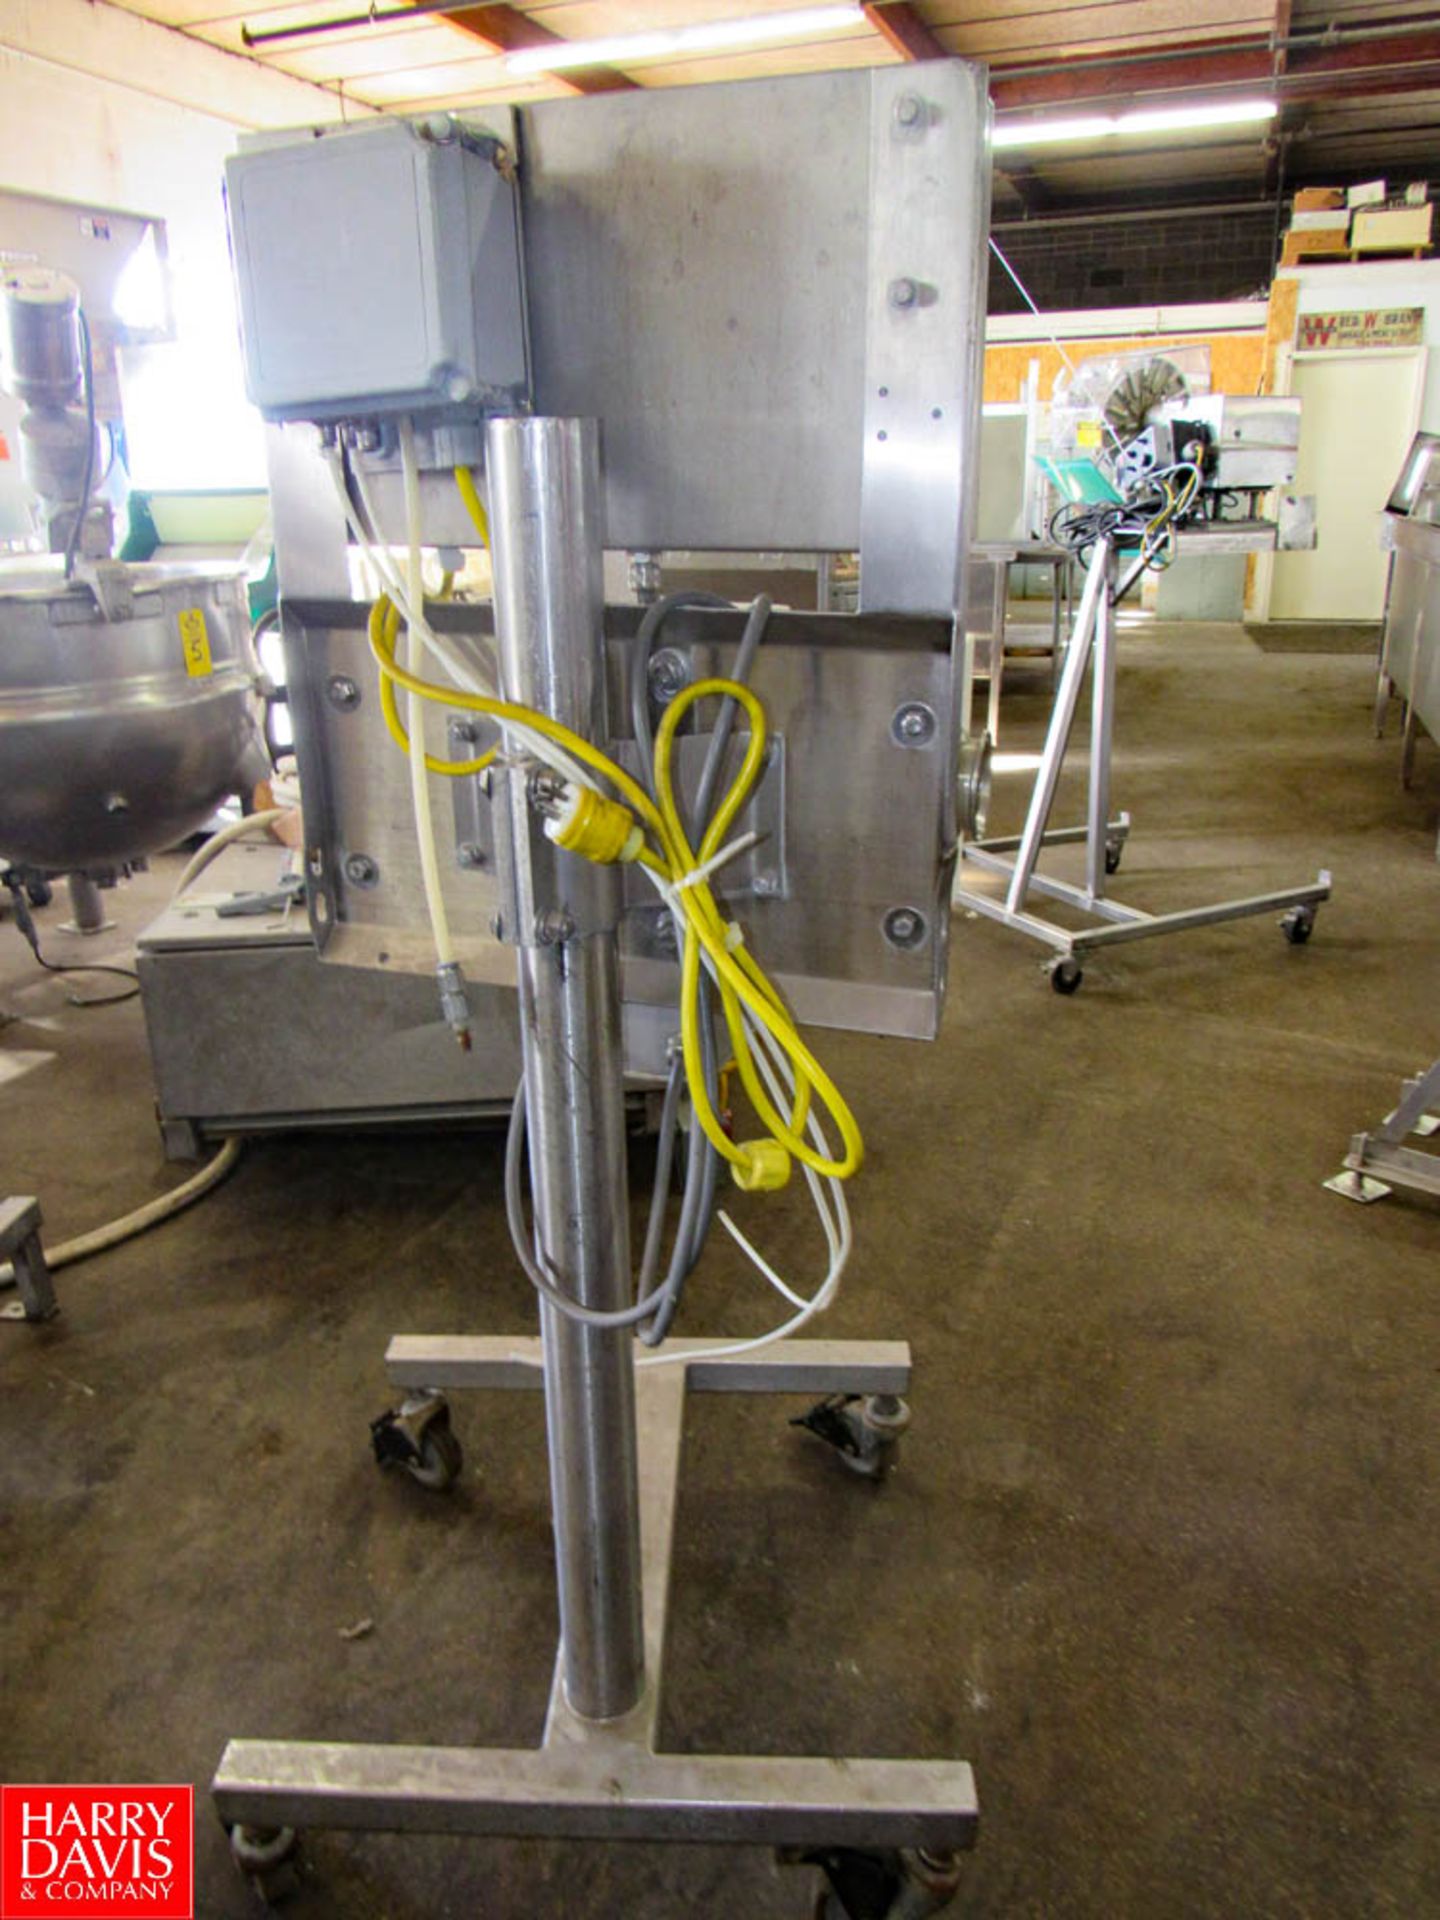 Safeline Inline Metal Detector, 2 1/2" Dia. Aperture, On S/S Stand, With No Controls Rigging - Image 5 of 5